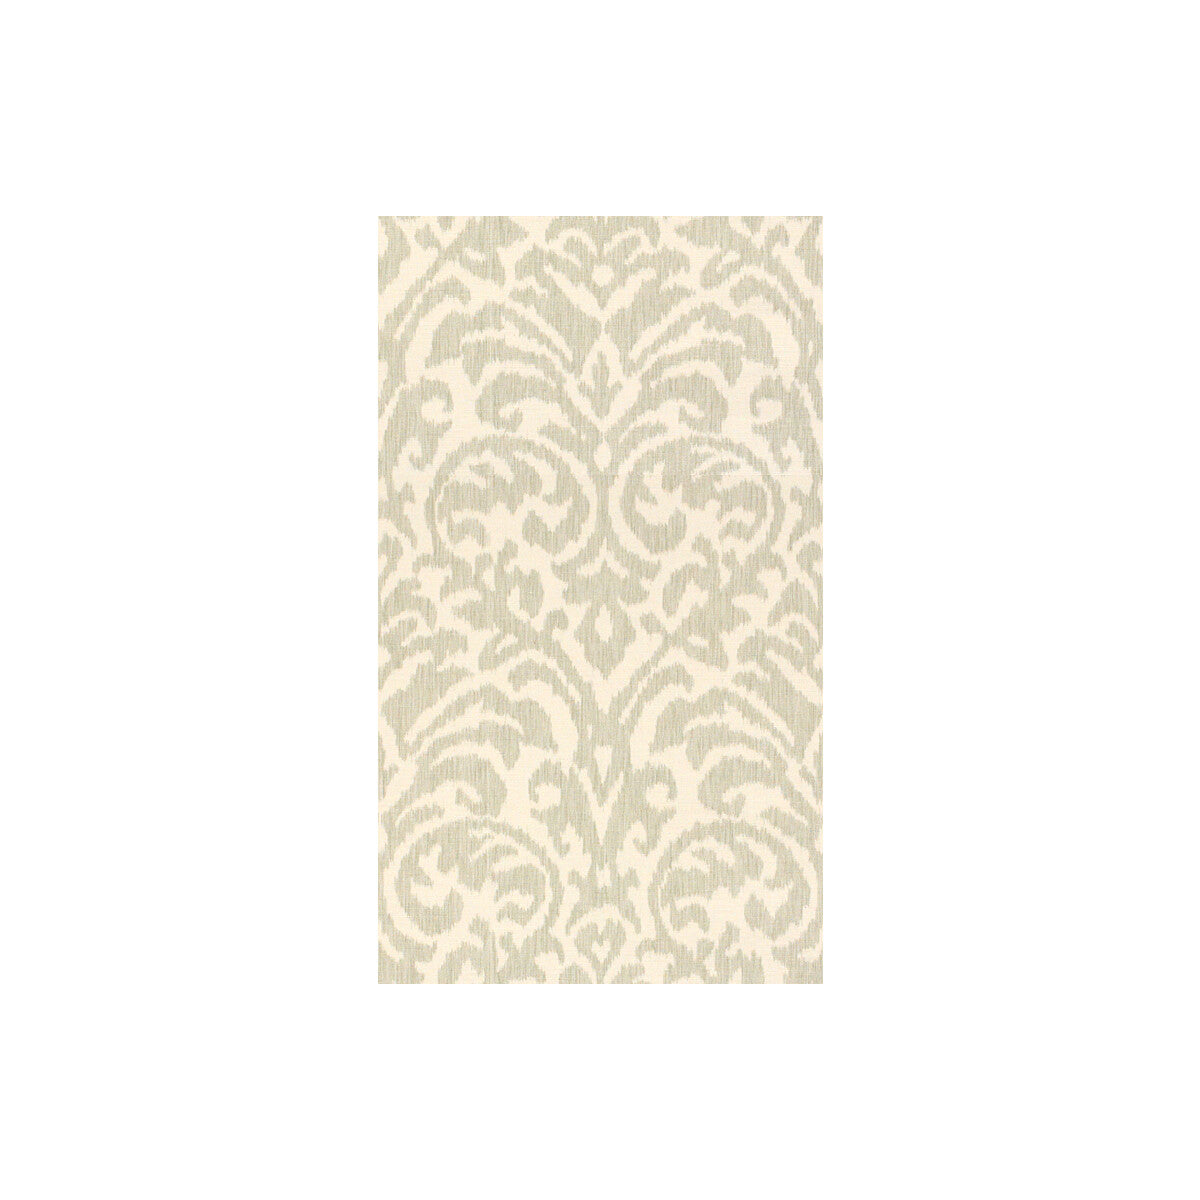 Ikat Damask fabric in mineral color - pattern 32051.15.0 - by Kravet Couture in the Modern Colors II collection